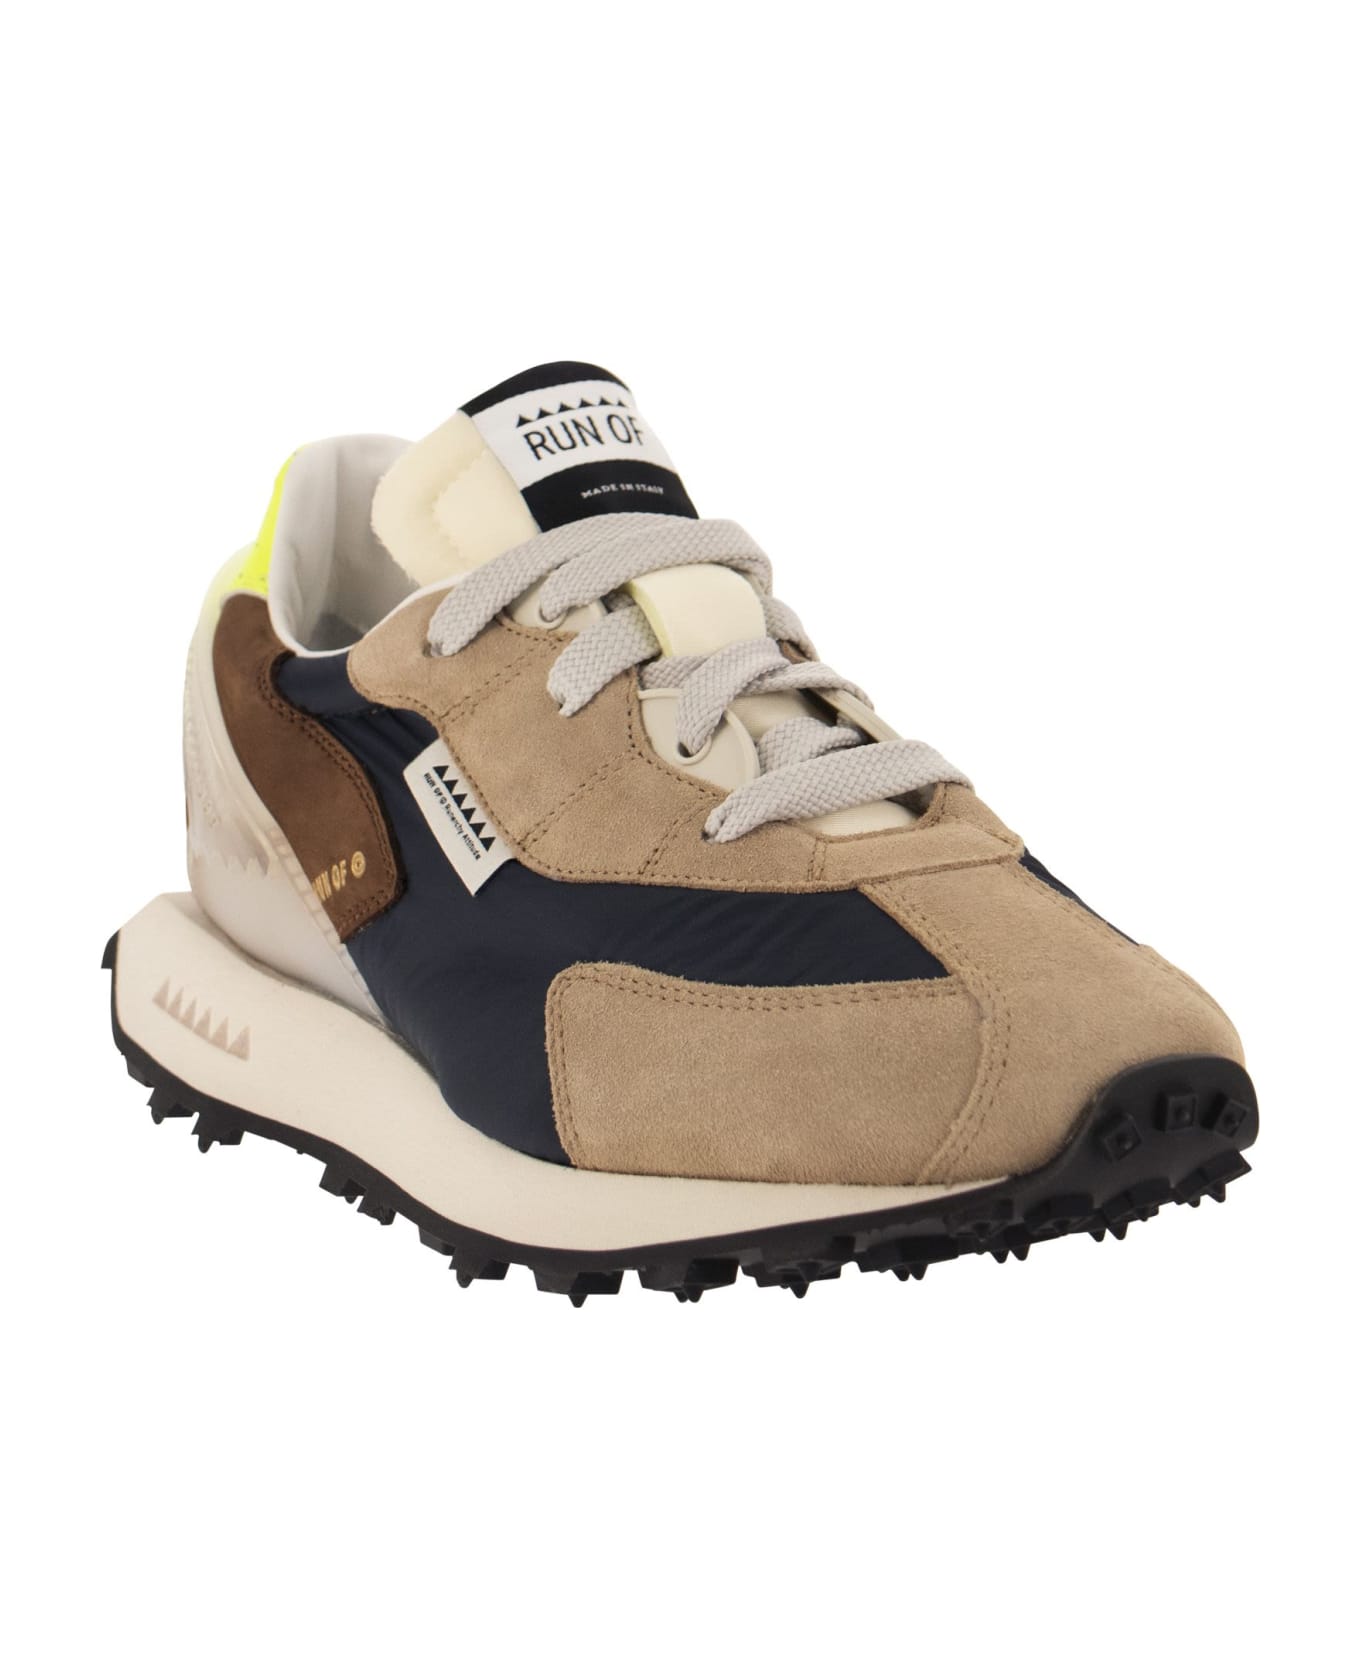 RUN OF Barrio M - Sneakers Suede, Canvas And Leather - Blue/beige